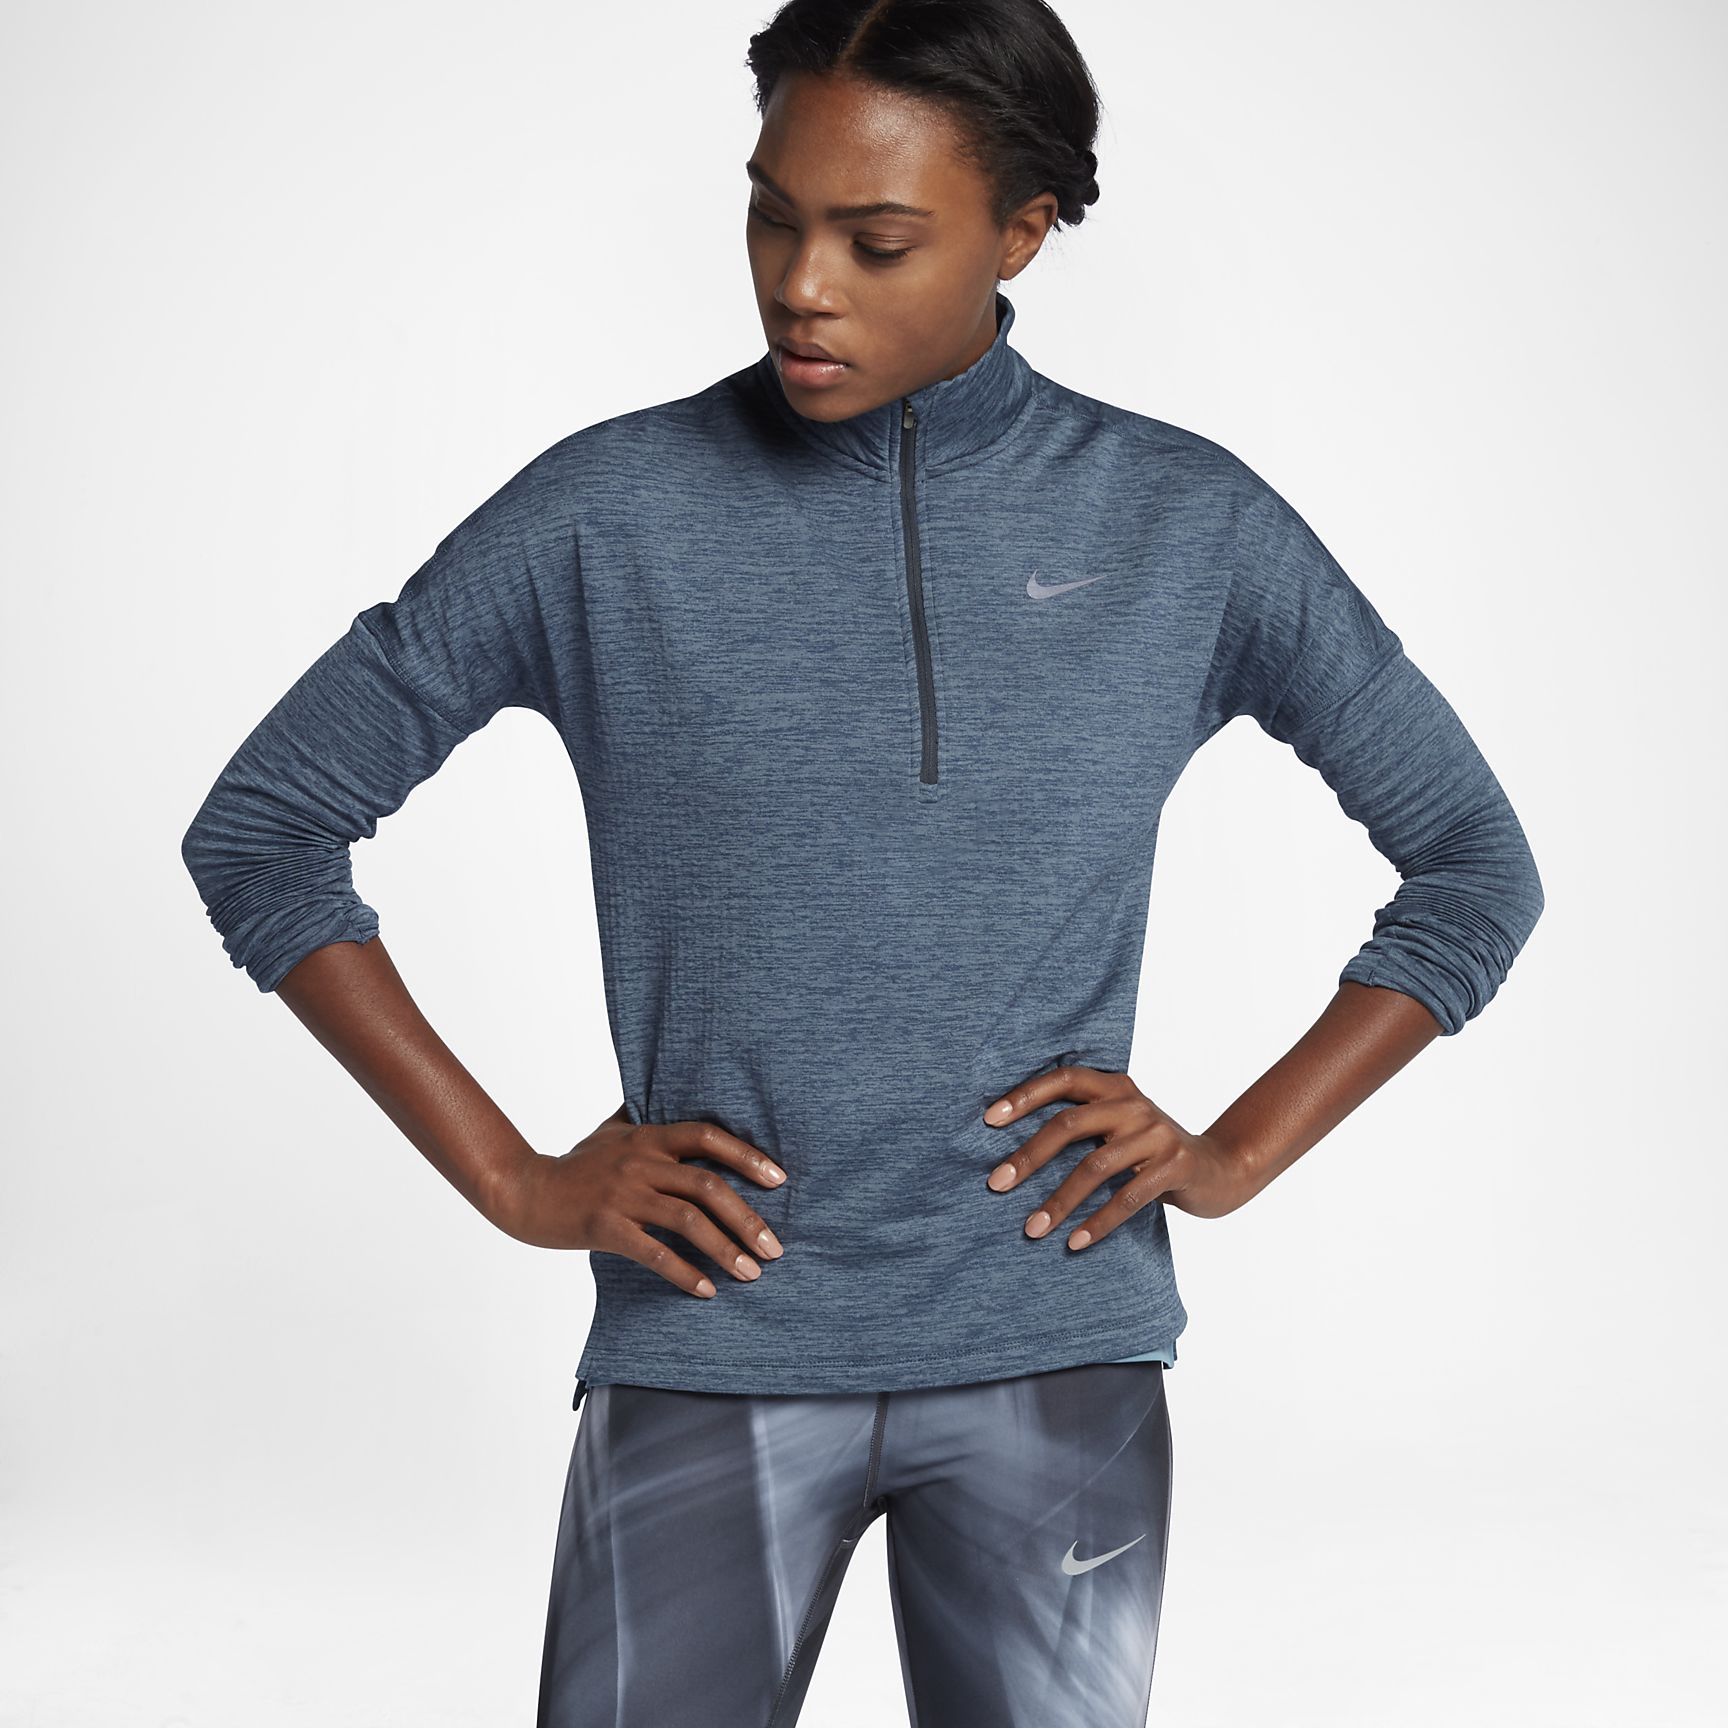 Nike Sphere Element HZ Top (Plus Size) Womens | Thunder Blue|Htr|Armory Blue - forrunnersbyrunners